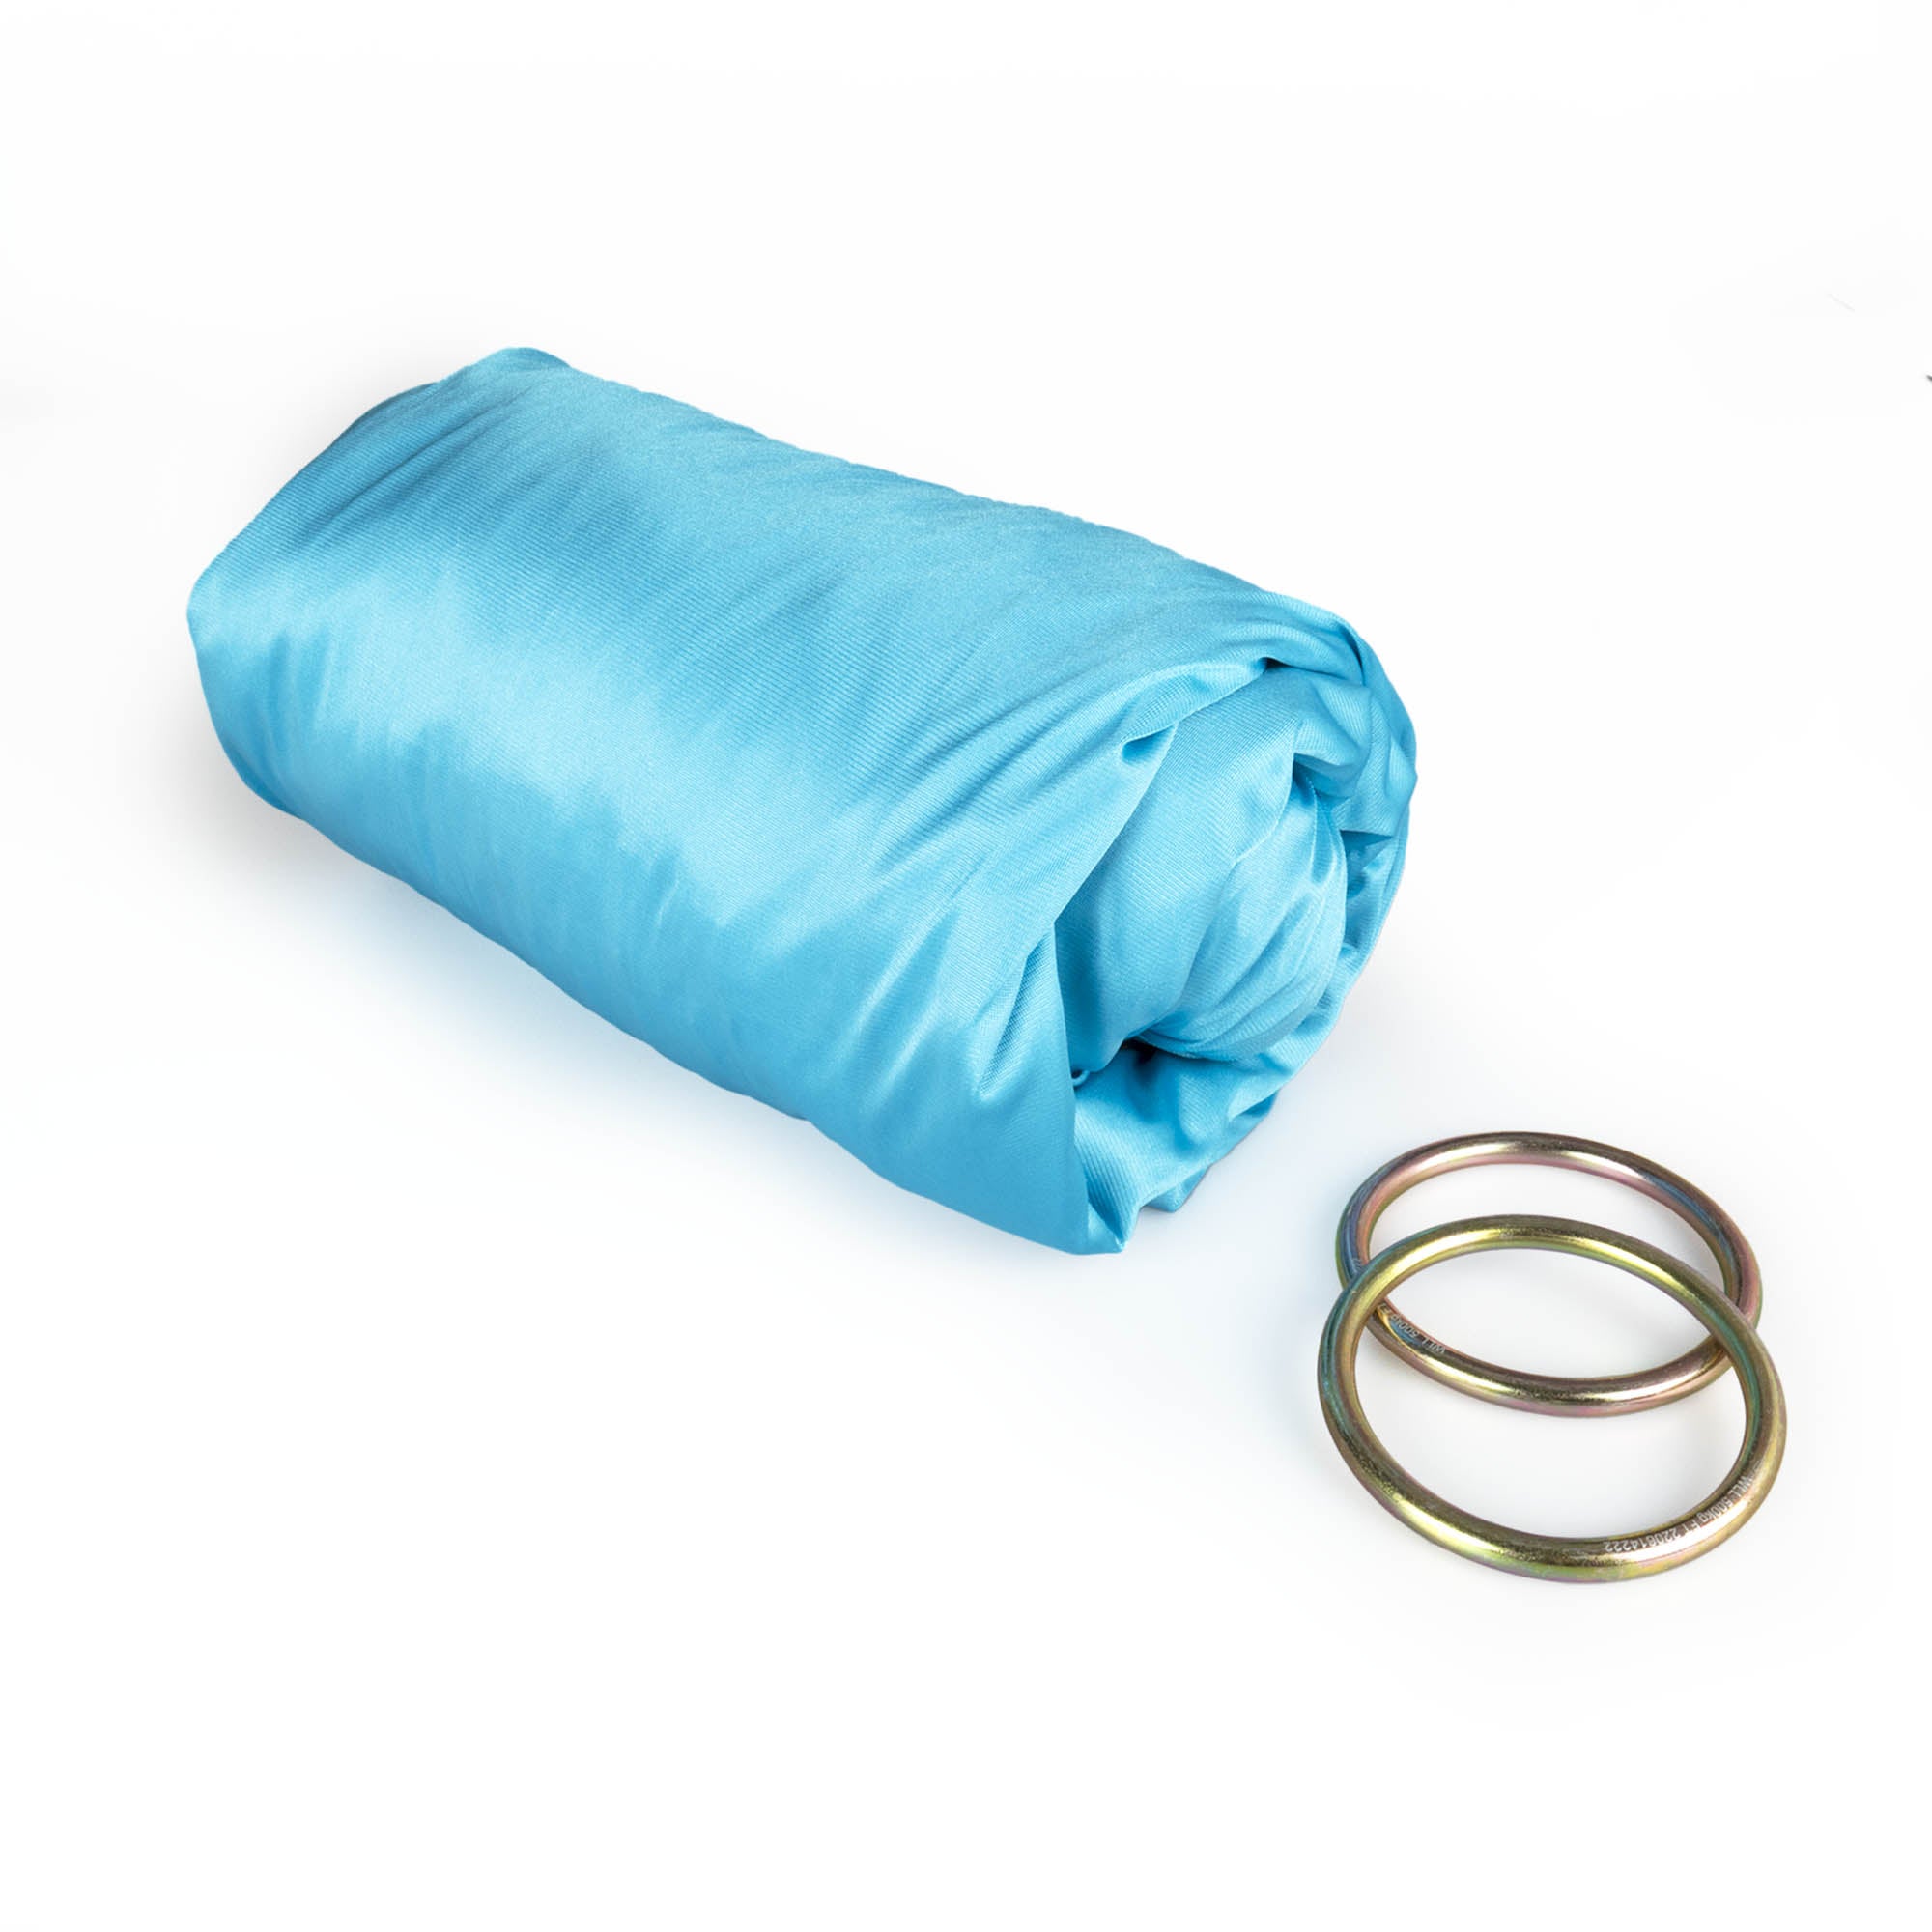 Turquoise yoga hammock rolled up with ring dettached